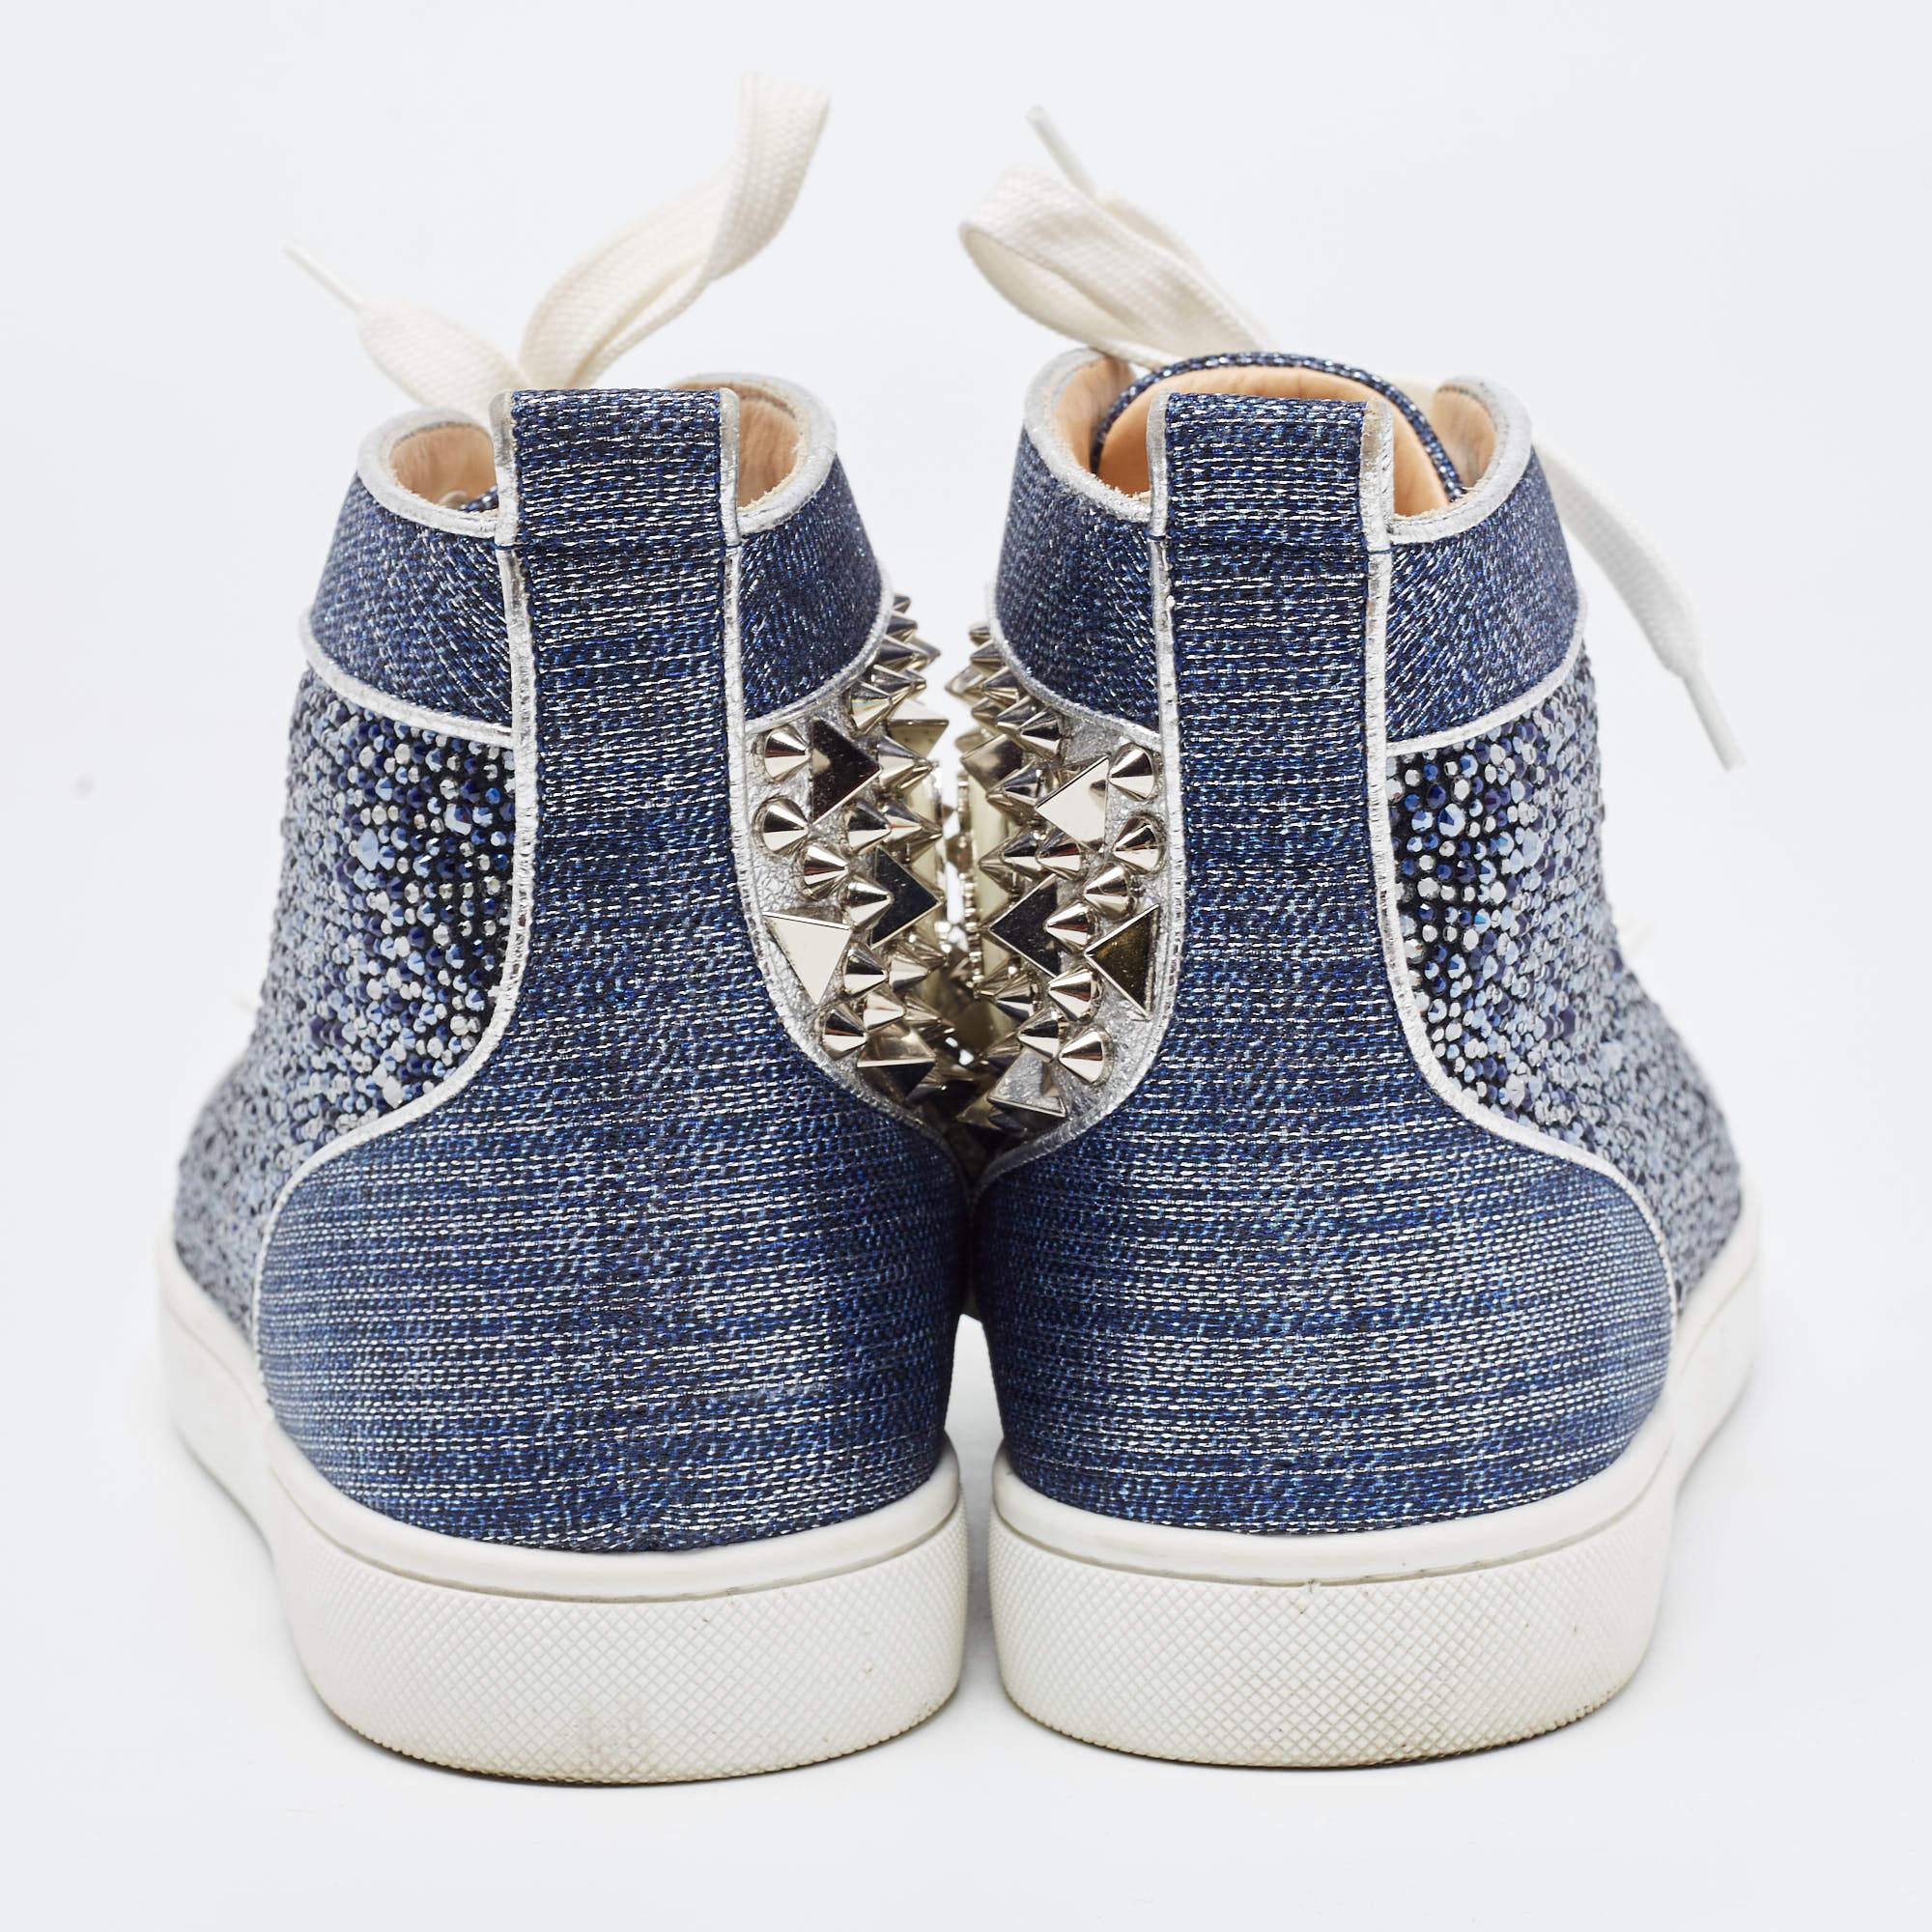 Christian Louboutin Blue/Silver Denim and Patent Lou Degra Spikes Studded Hi Hig For Sale 3